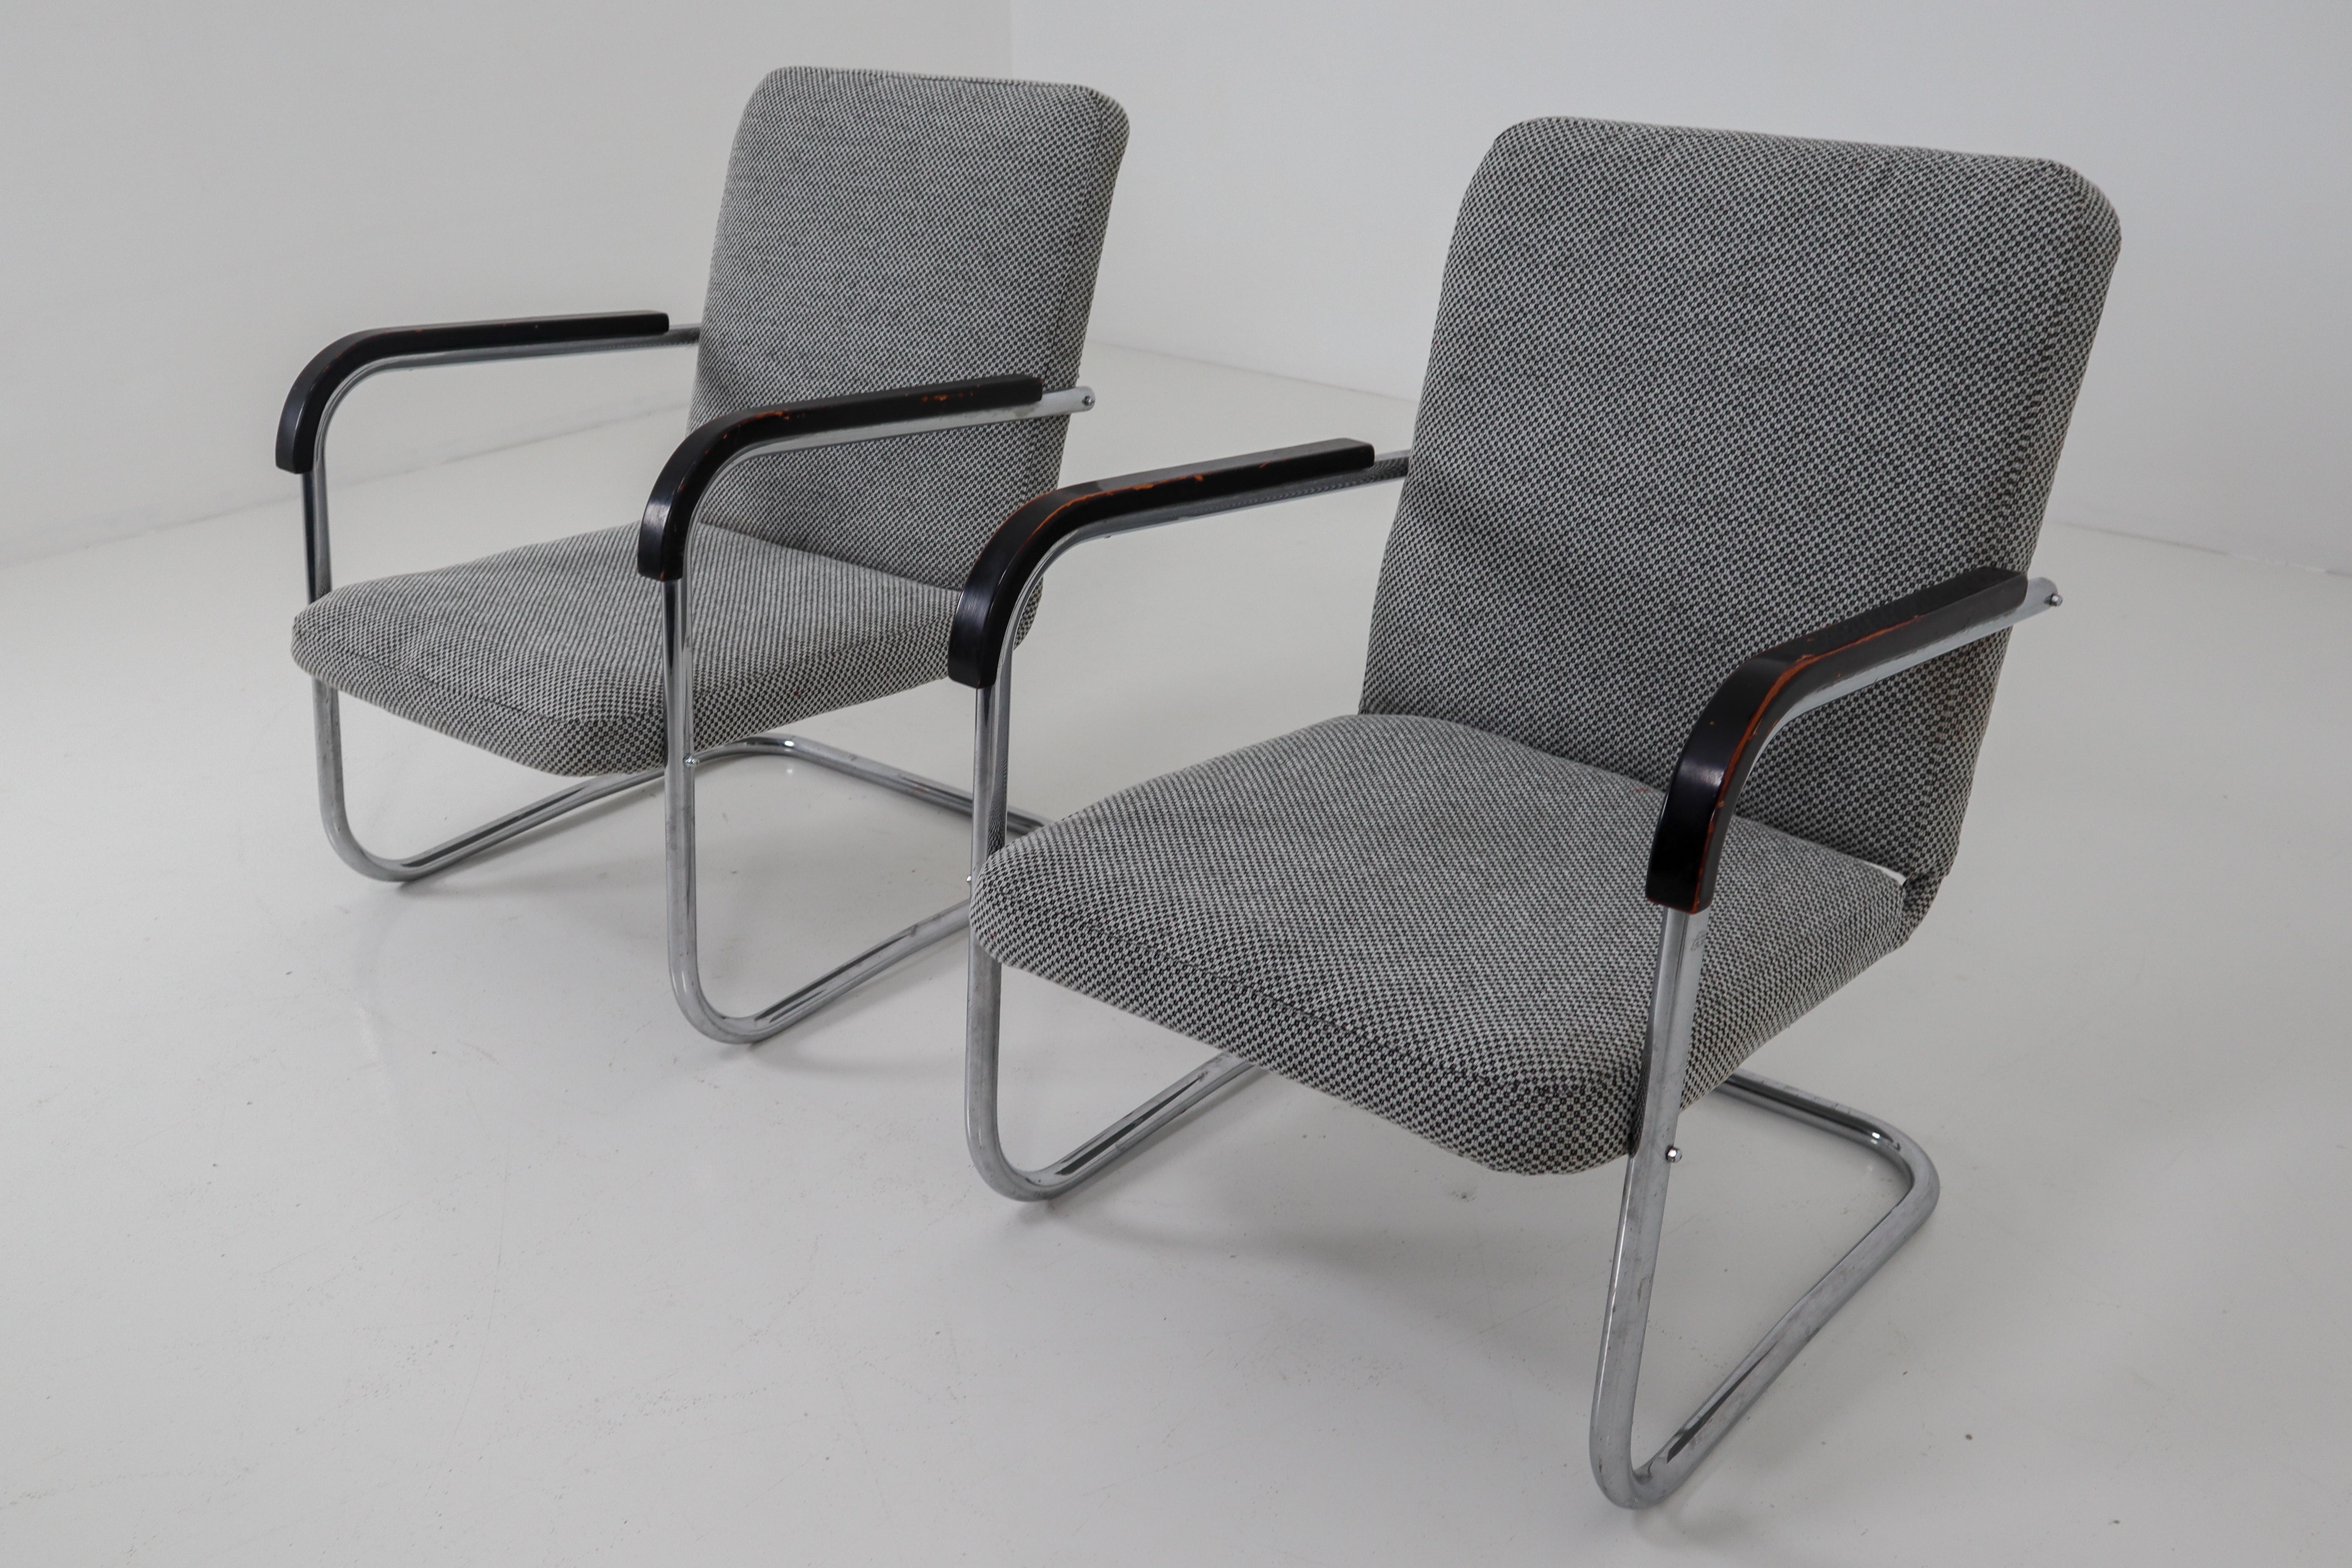 Pair of armchairs by Thonet circa 1930s midcentury Bauhaus period. These cantilever armchairs are typical for the German and Eastern Europe Bauhaus era. These armchairs has a tubular steel frame and is Re-upholstered with a grey fabric. The original